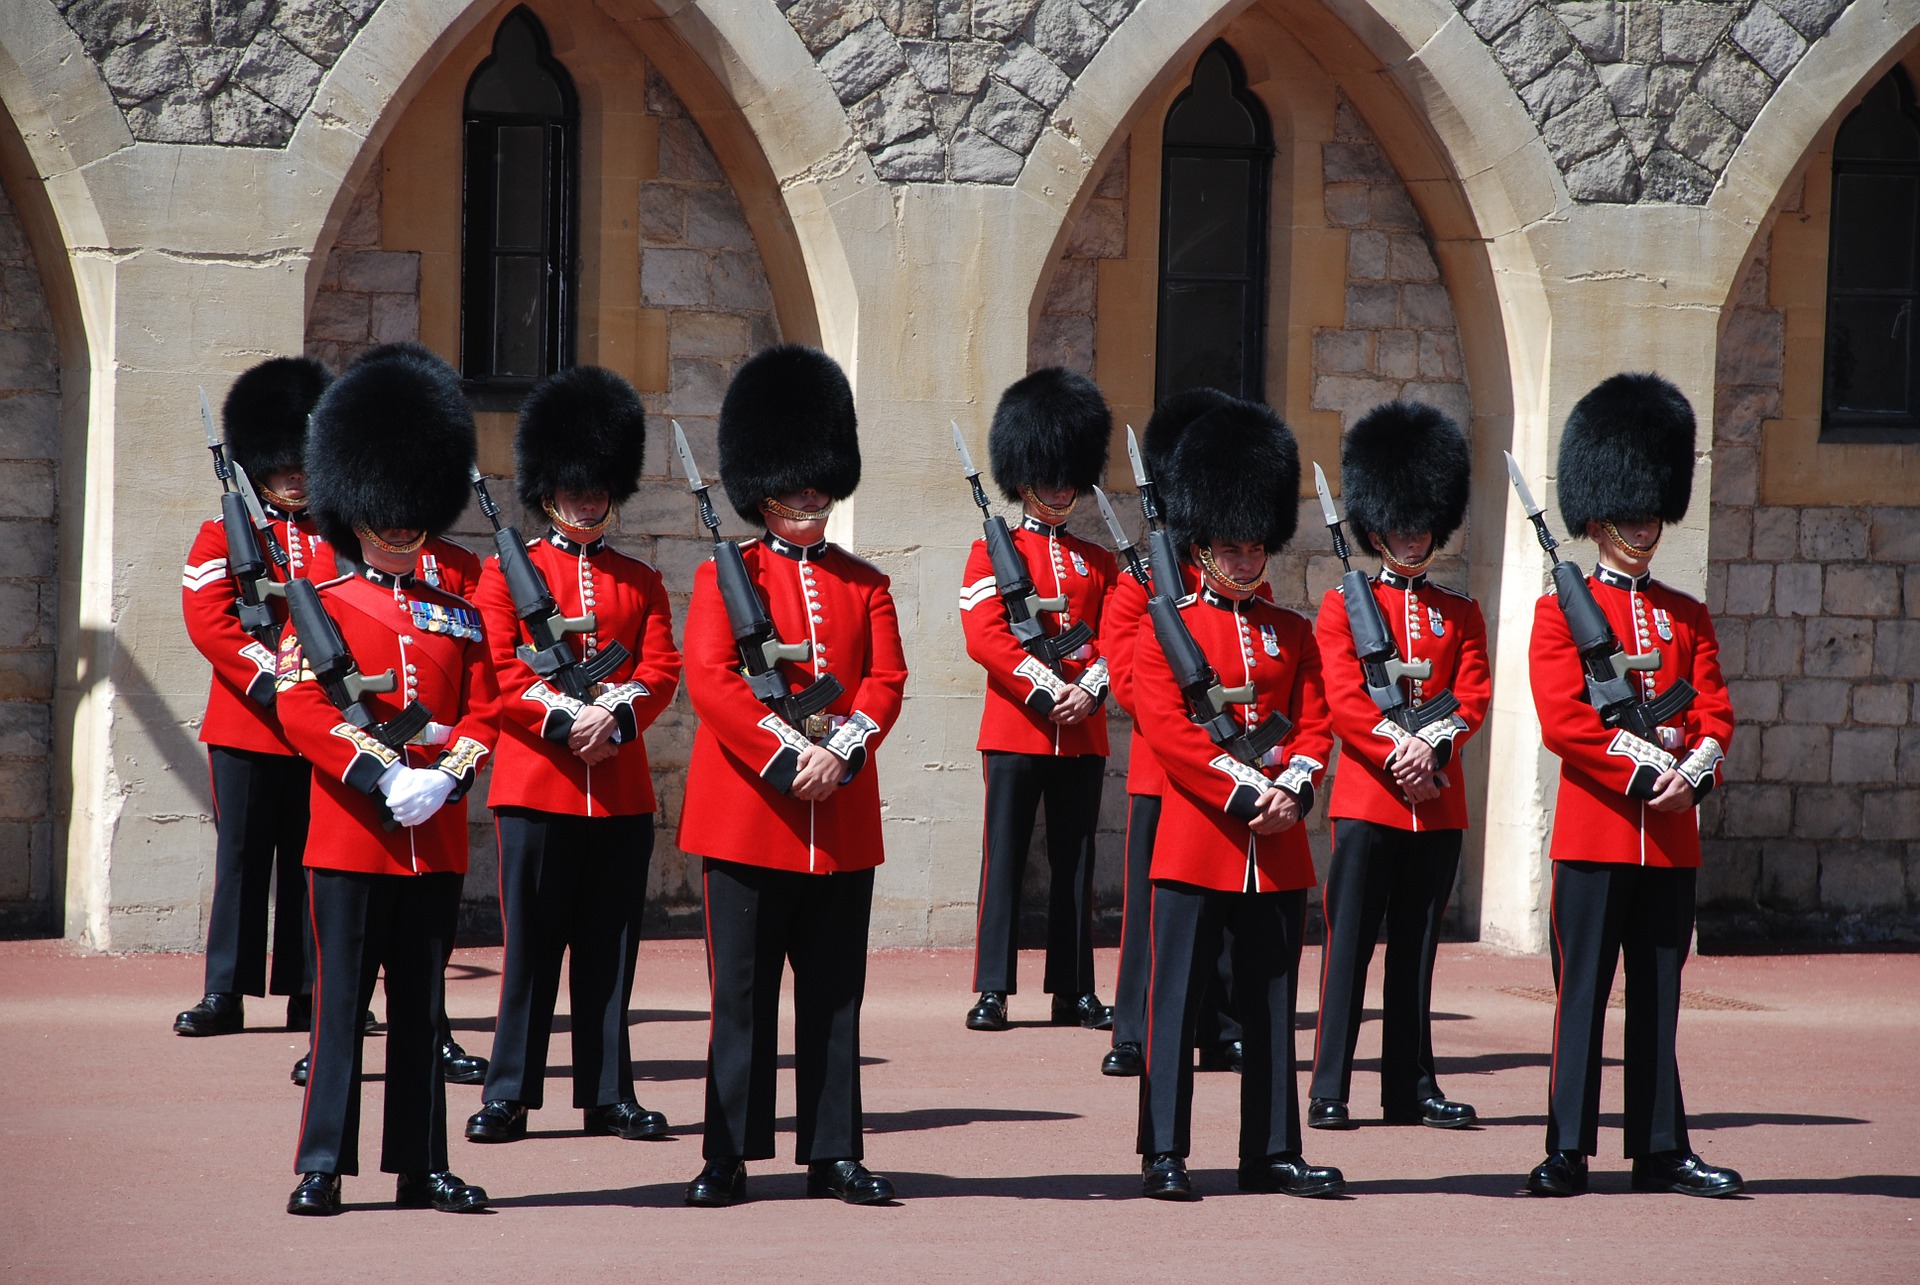 Changing the Guard at Windsor Castle.